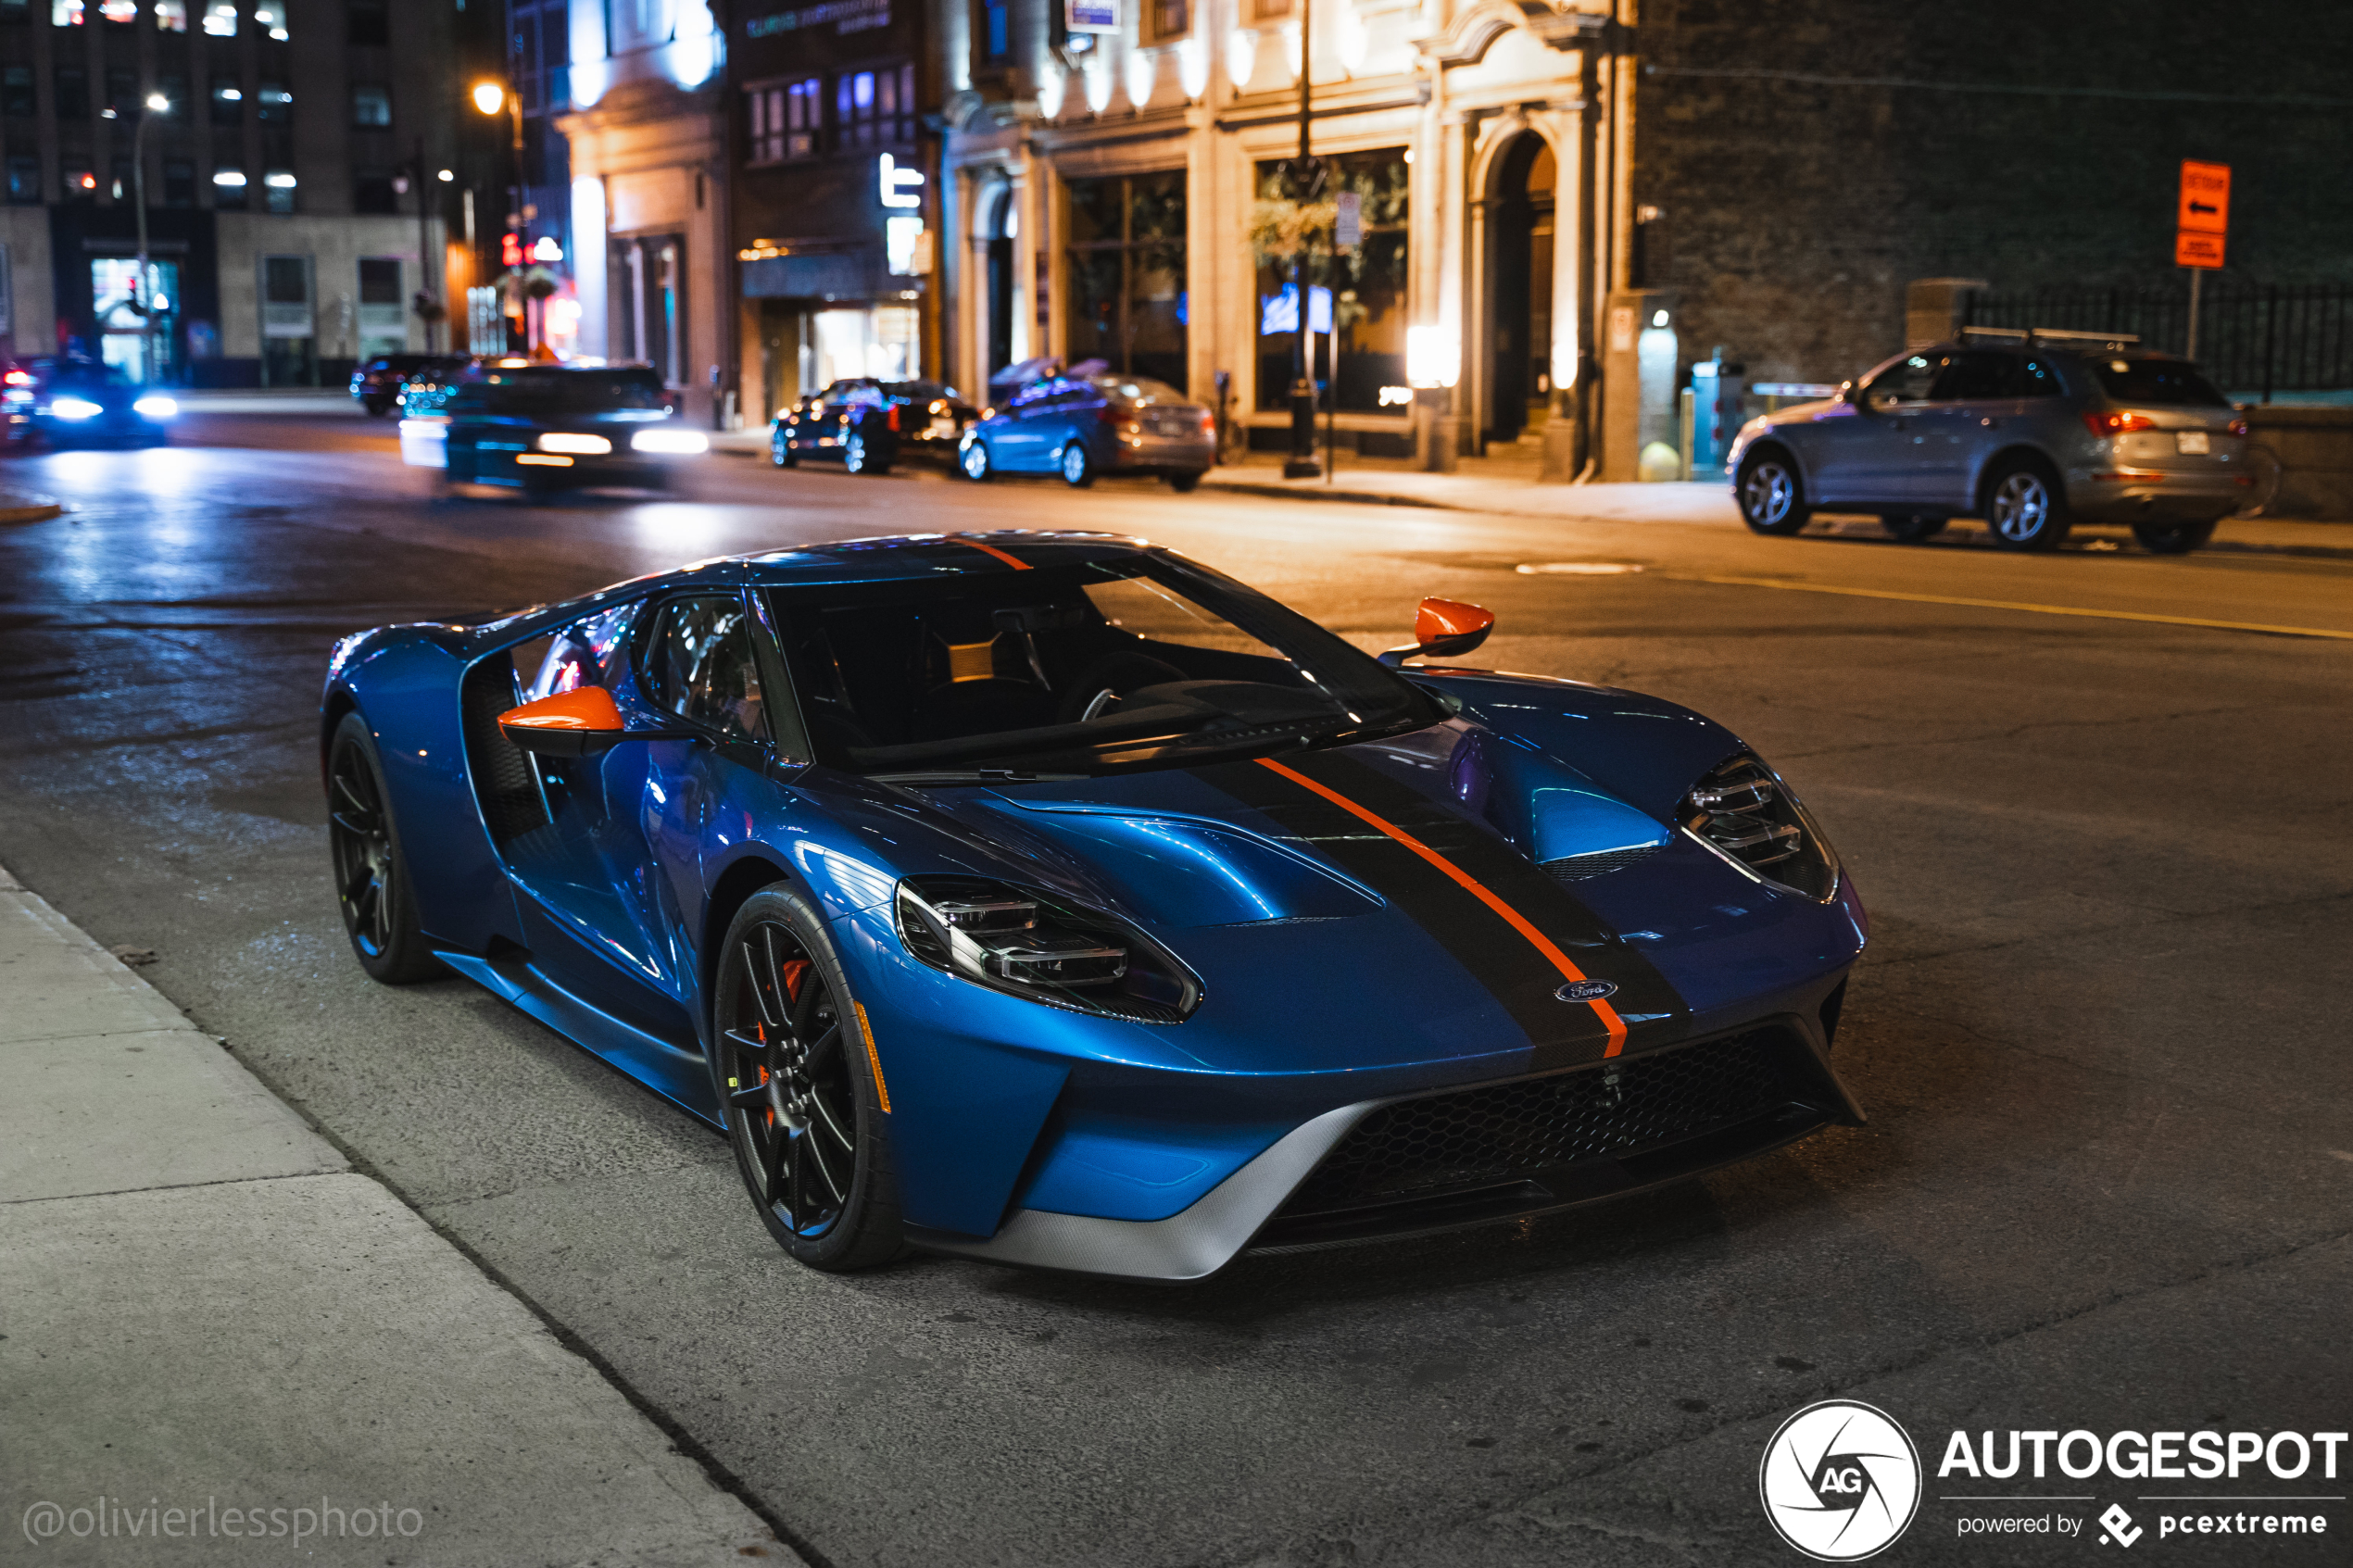 Once again Canada delivers a Ford GT Carbon Series